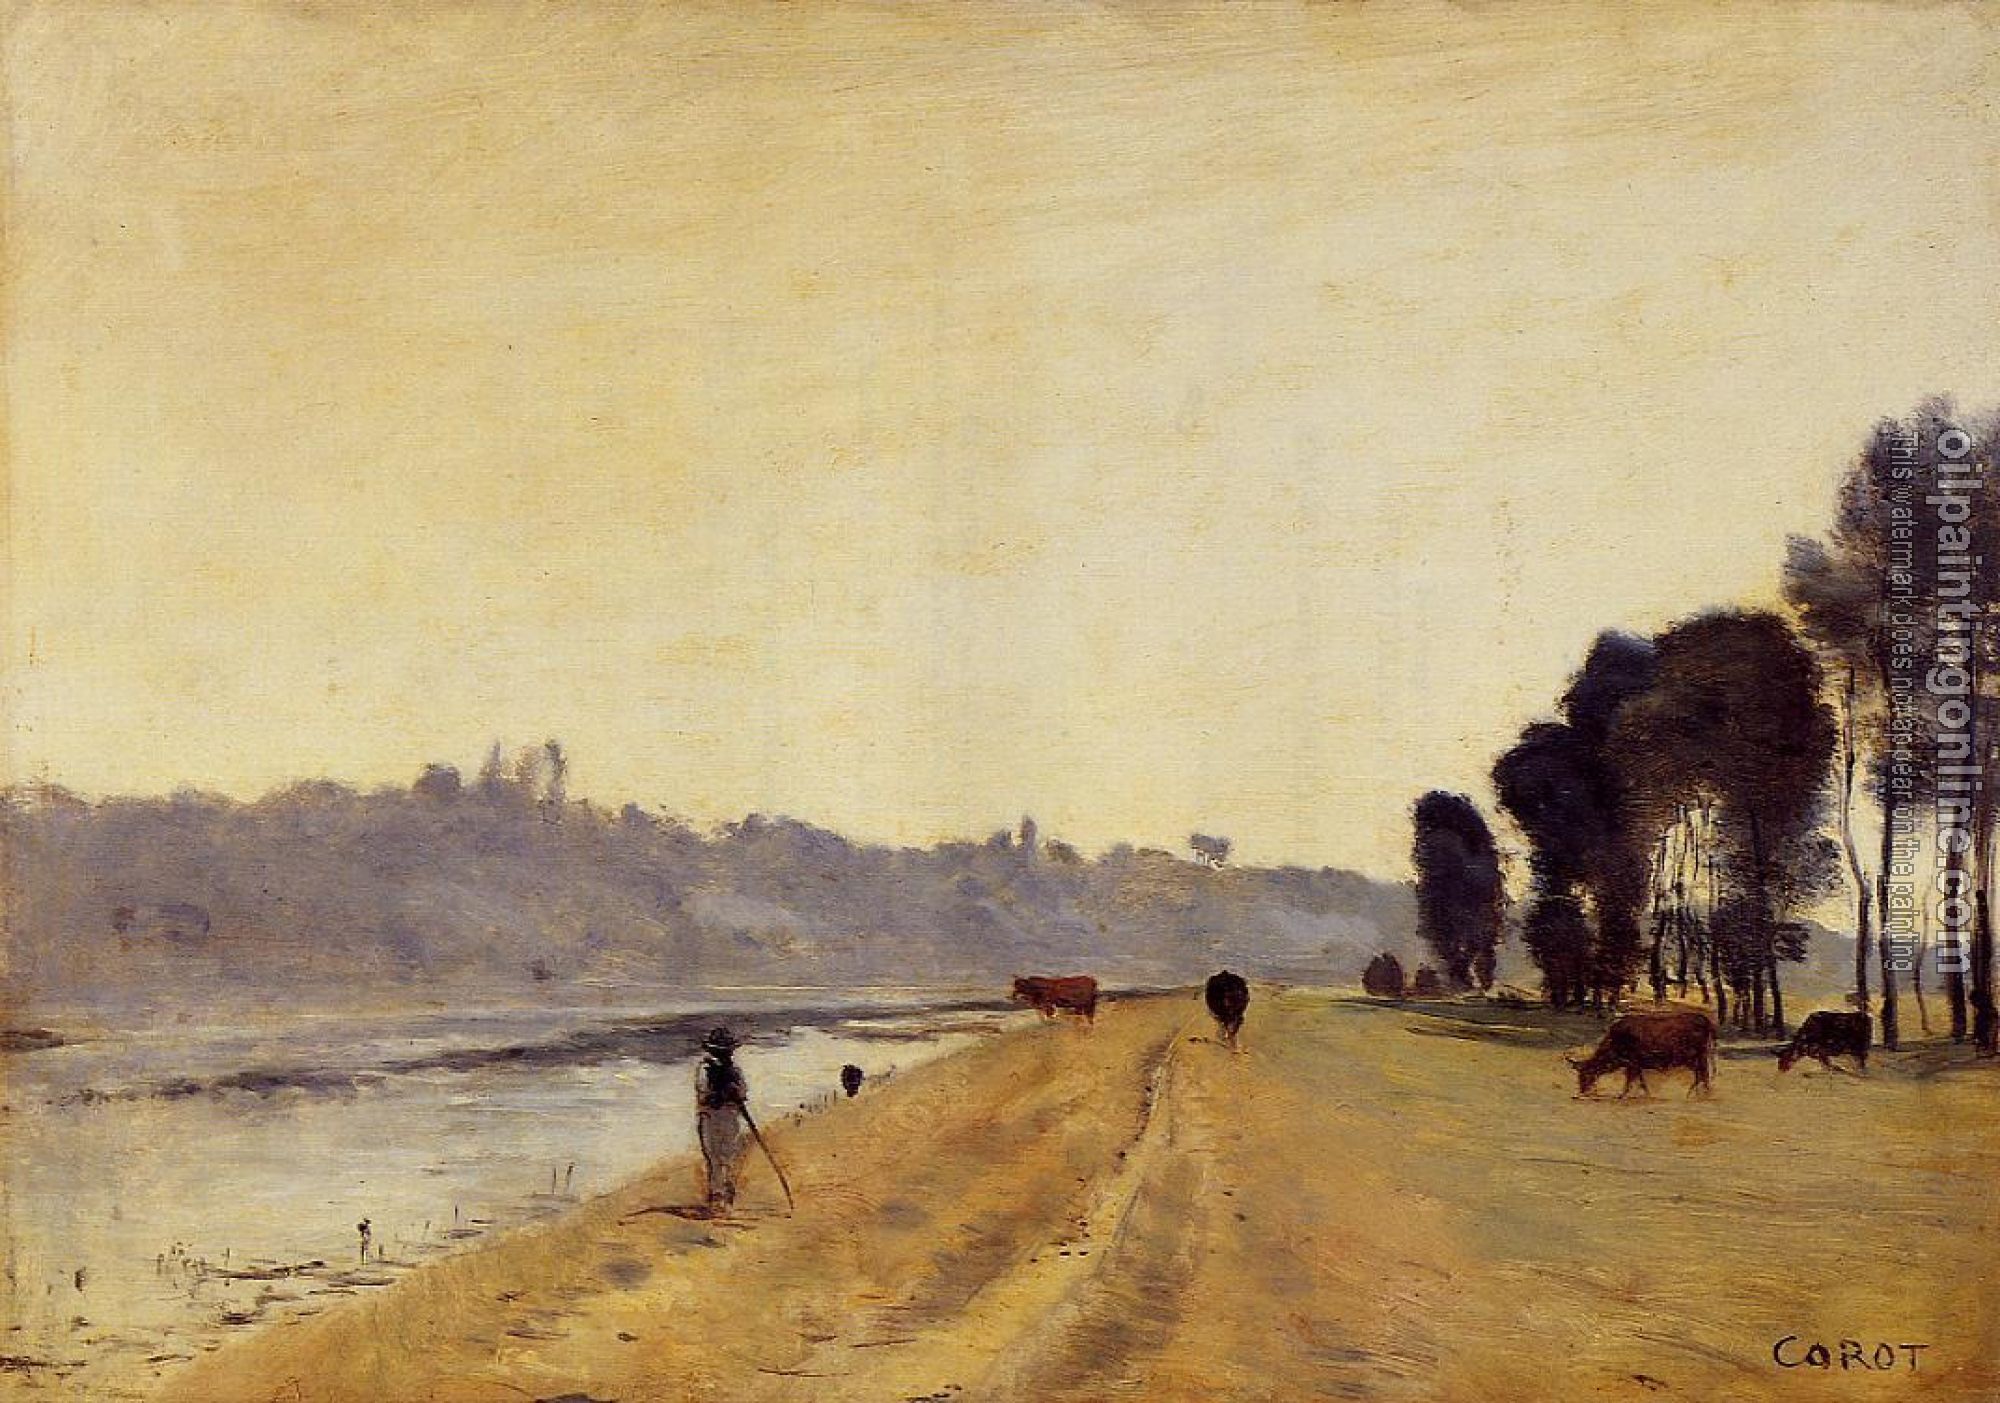 Corot, Jean-Baptiste-Camille - Banks of a River